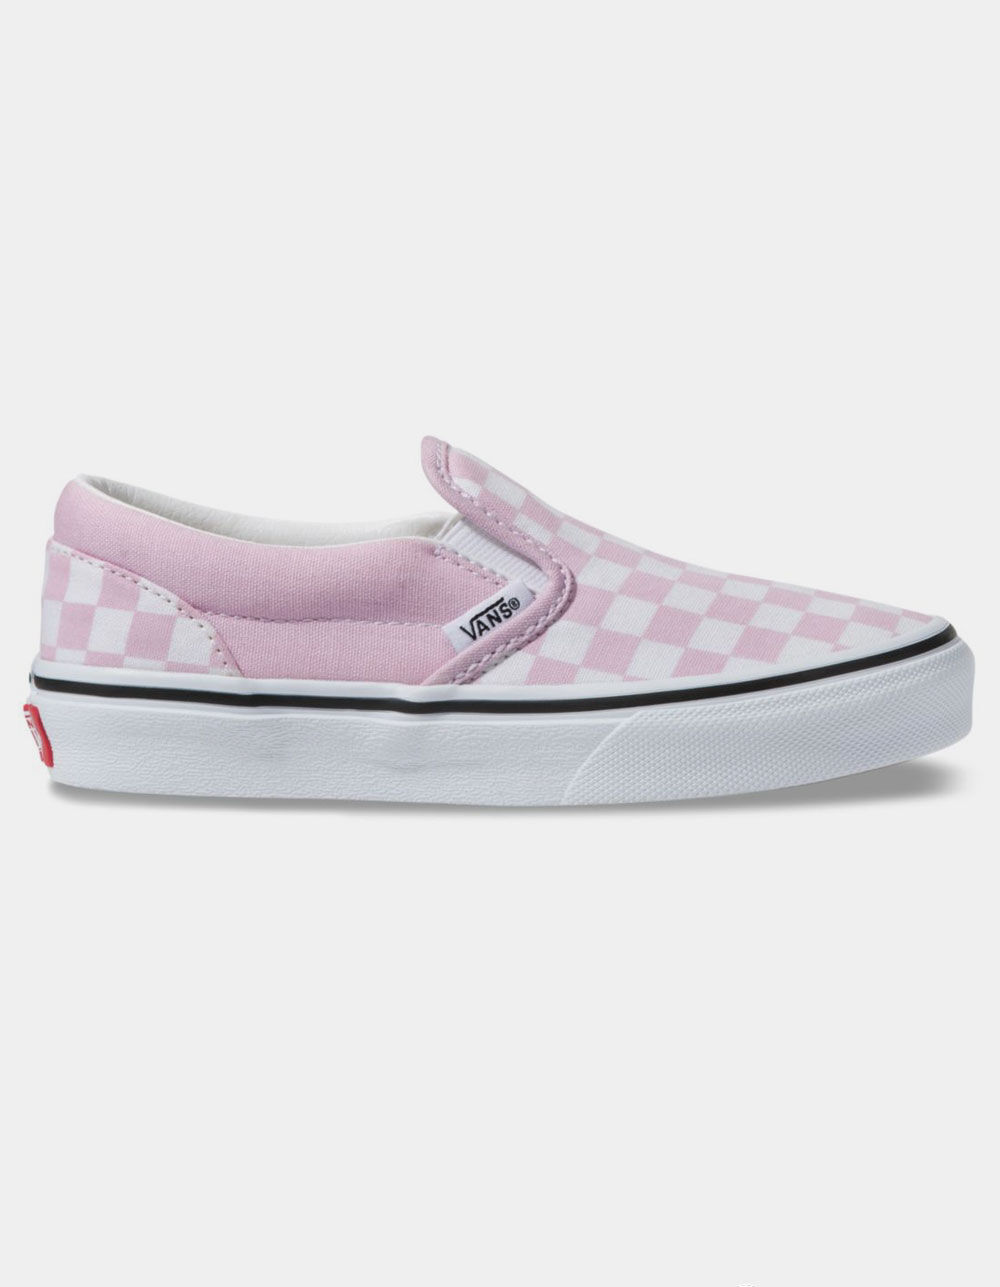 VANS Checkerboard Classic Slip-On Lilac Snow & True White Girls Shoes ...